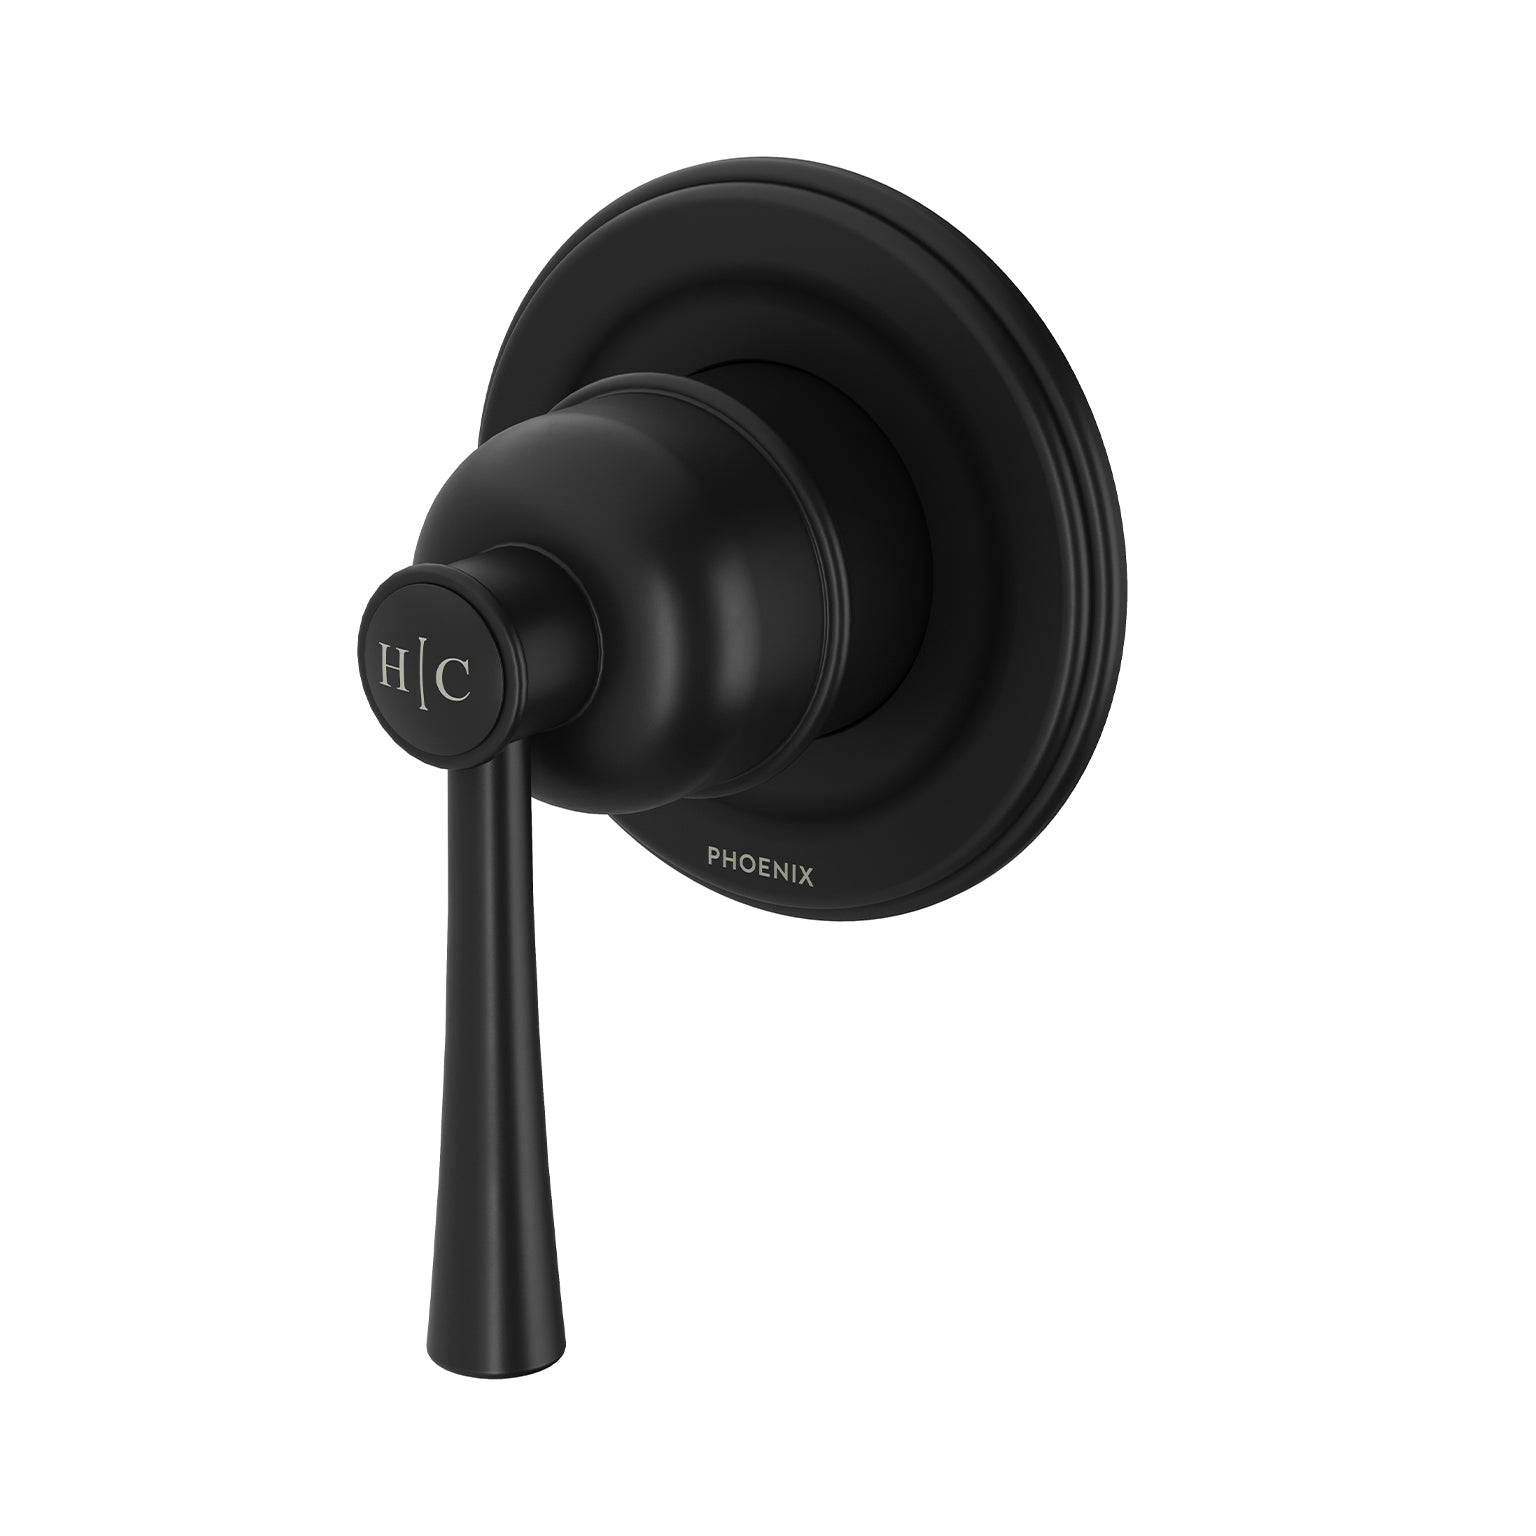 PHOENIX CROMFORD SWITCHMIX SHOWER / WALL MIXER FIT-OFF AND ROUGH-IN KIT MATTE BLACK